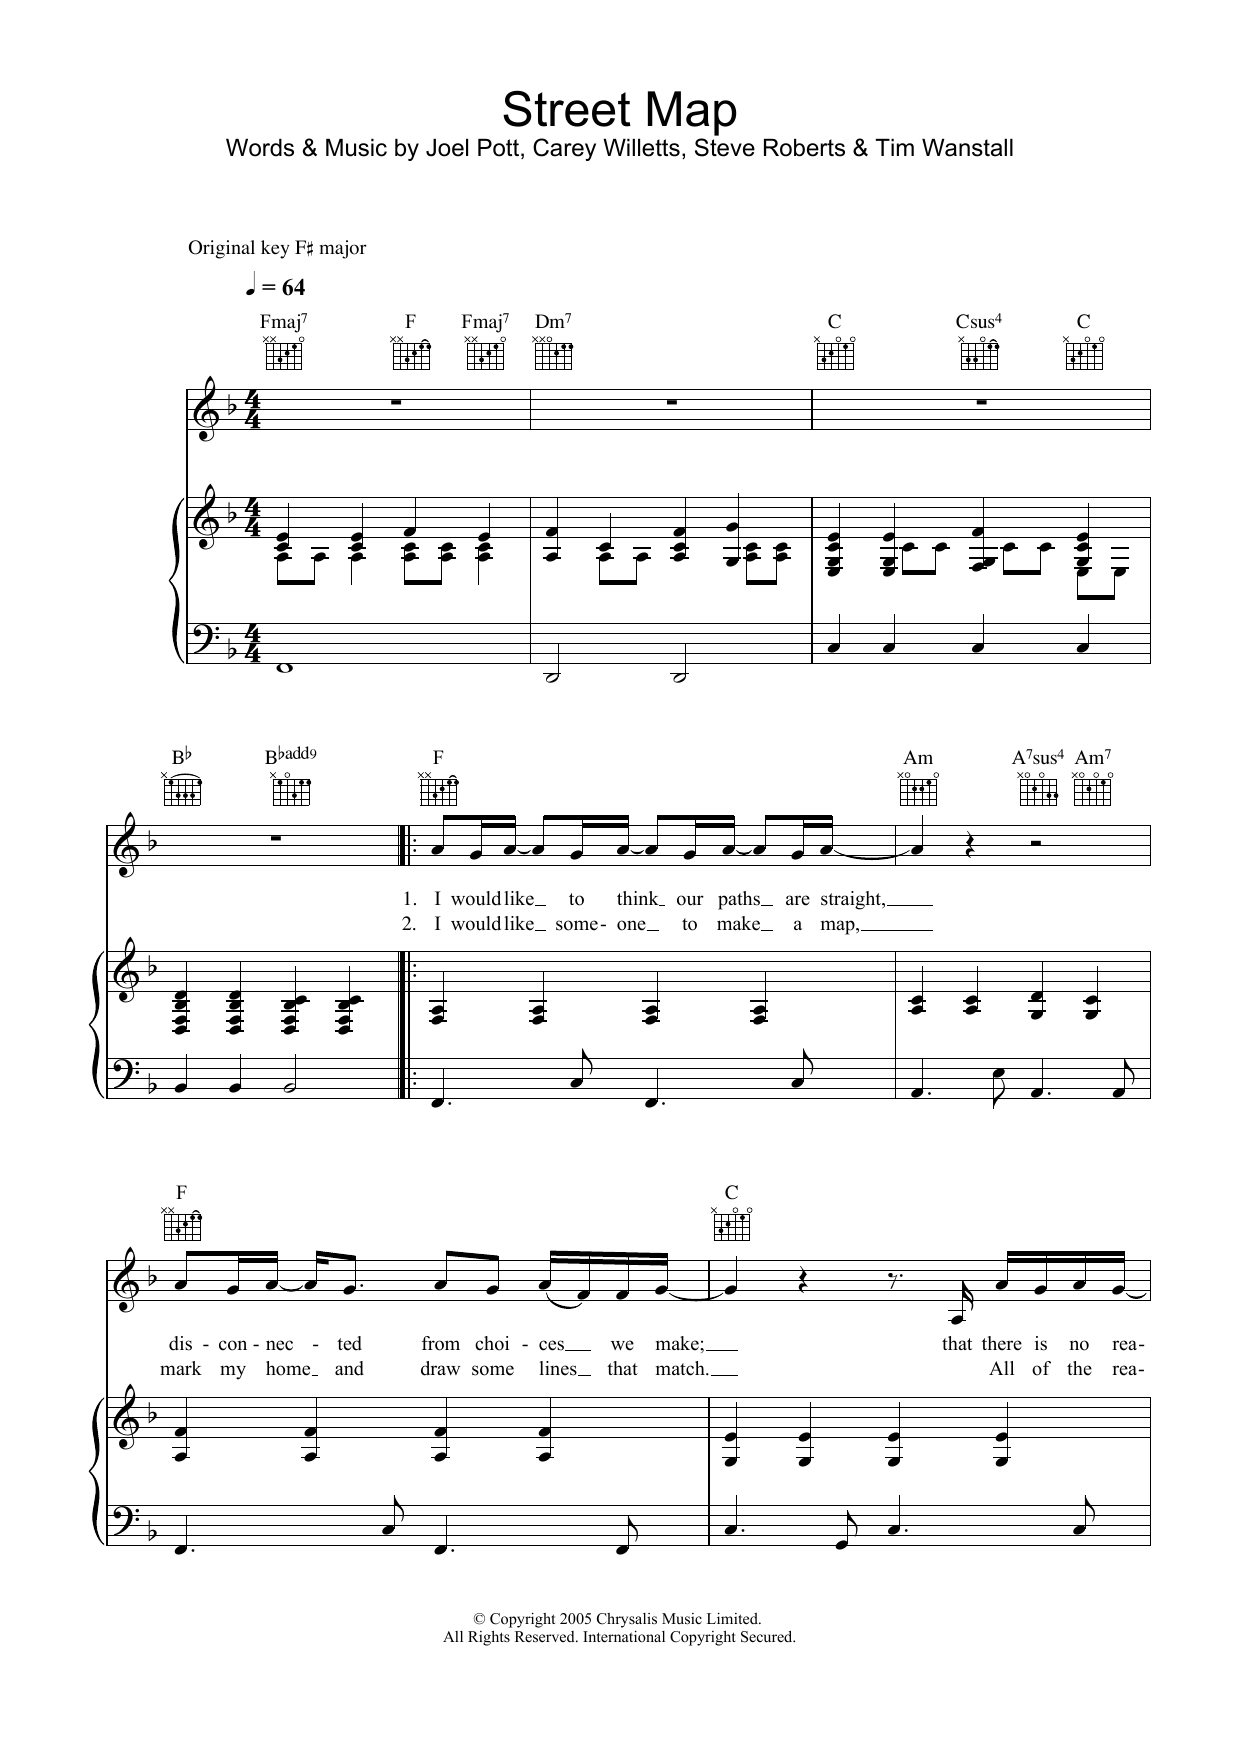 Athlete Street Map sheet music notes and chords. Download Printable PDF.